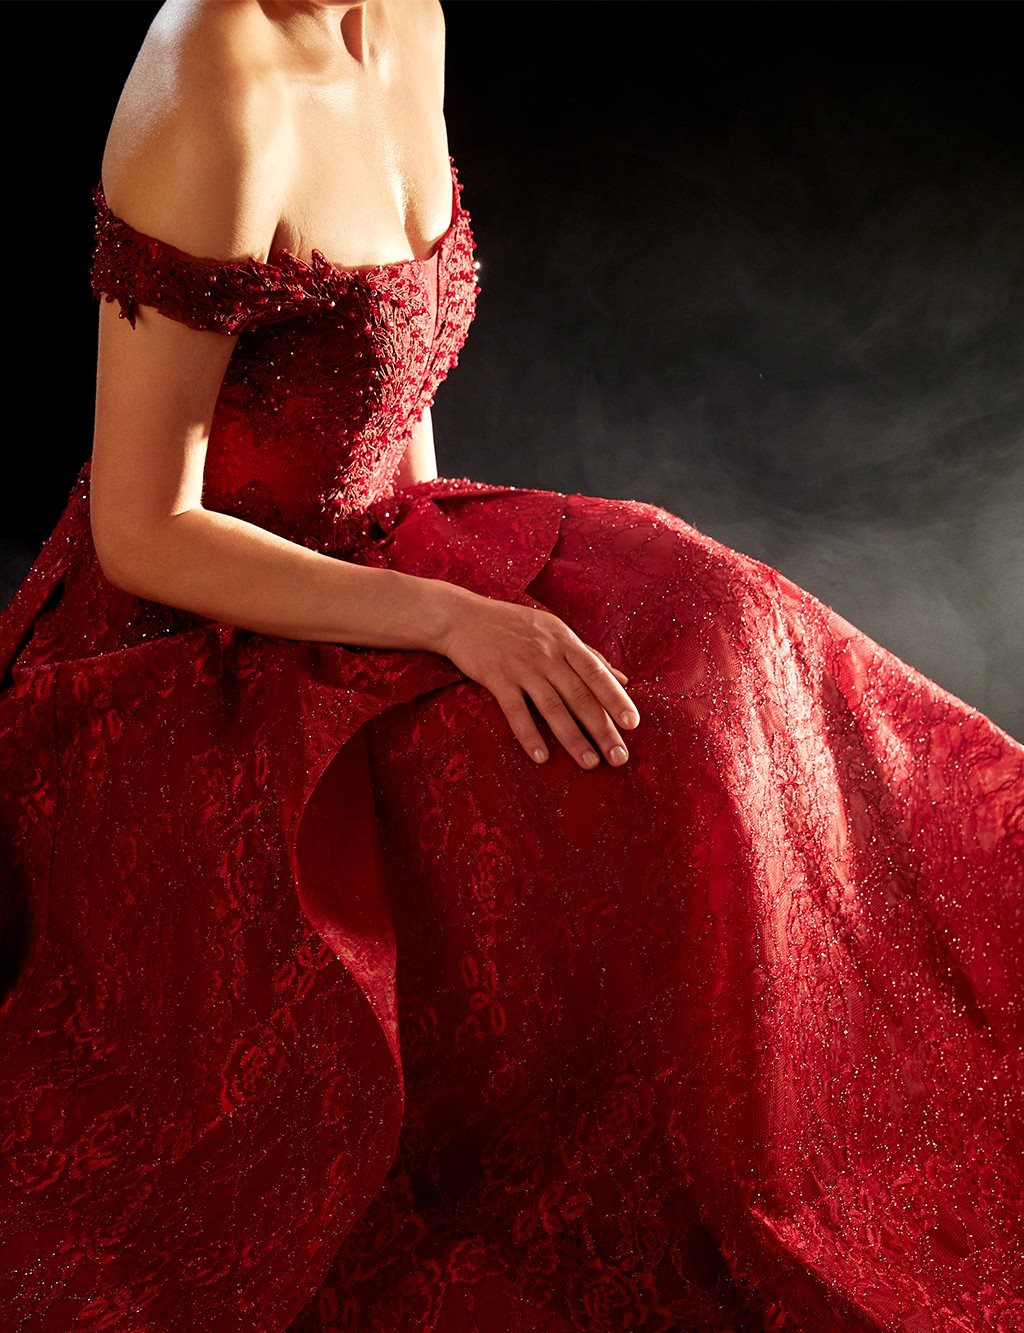  TIARA Laced Ruffled Boat Neck Evening Dress B9 26056 Red